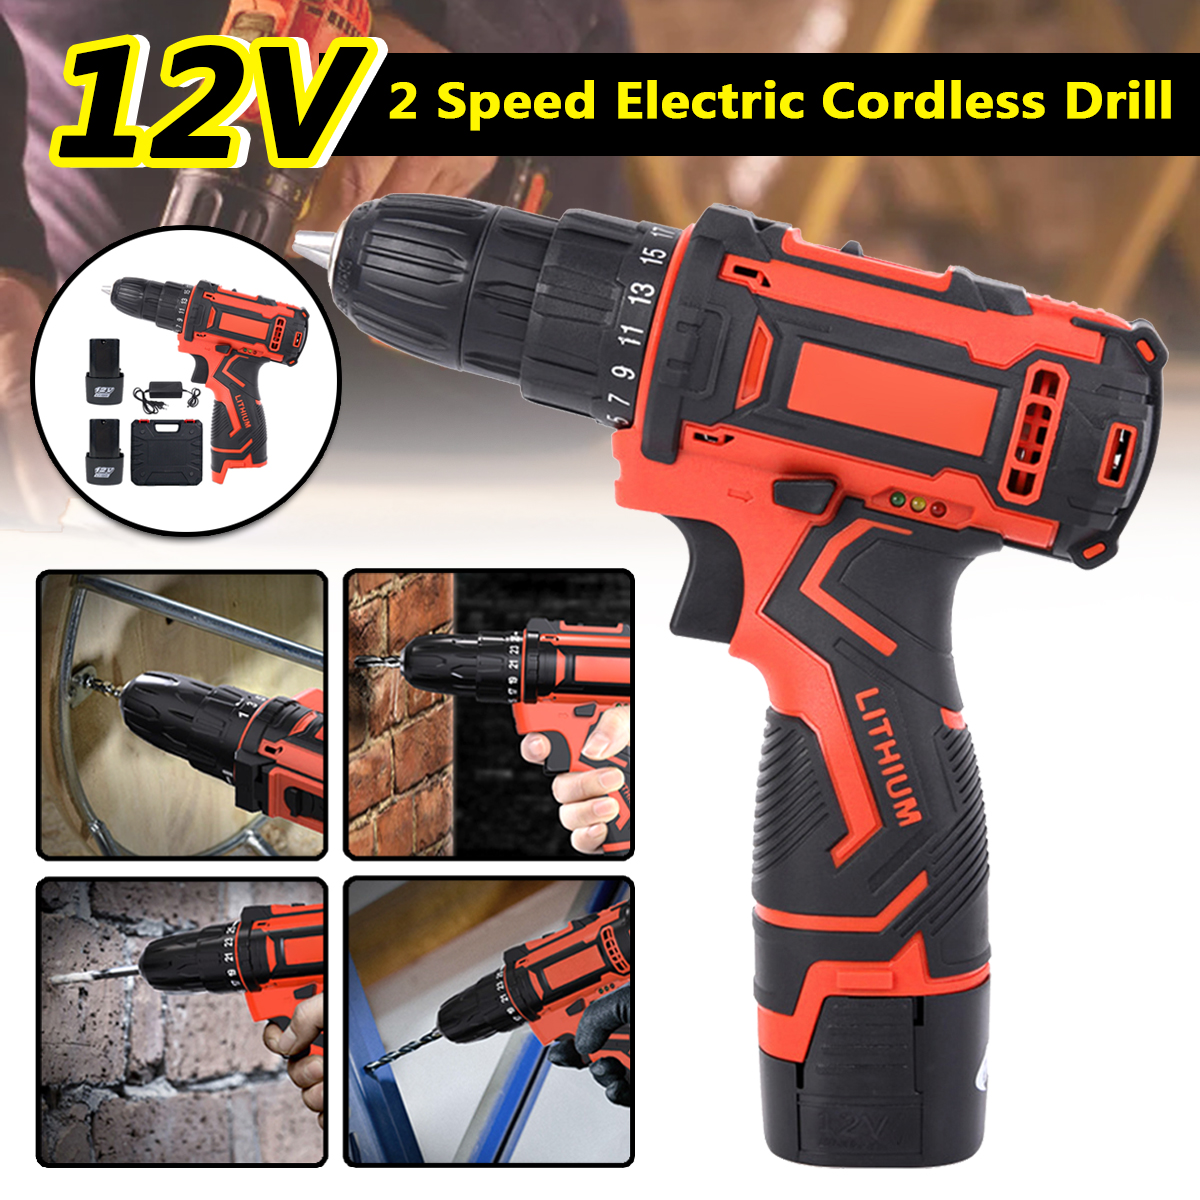 12V-Electric-Drill-Cordless-Wireless-Rechargeable-Electric-Screwdriver-Drill-Set-LED-W-12-Batteries--1860321-1